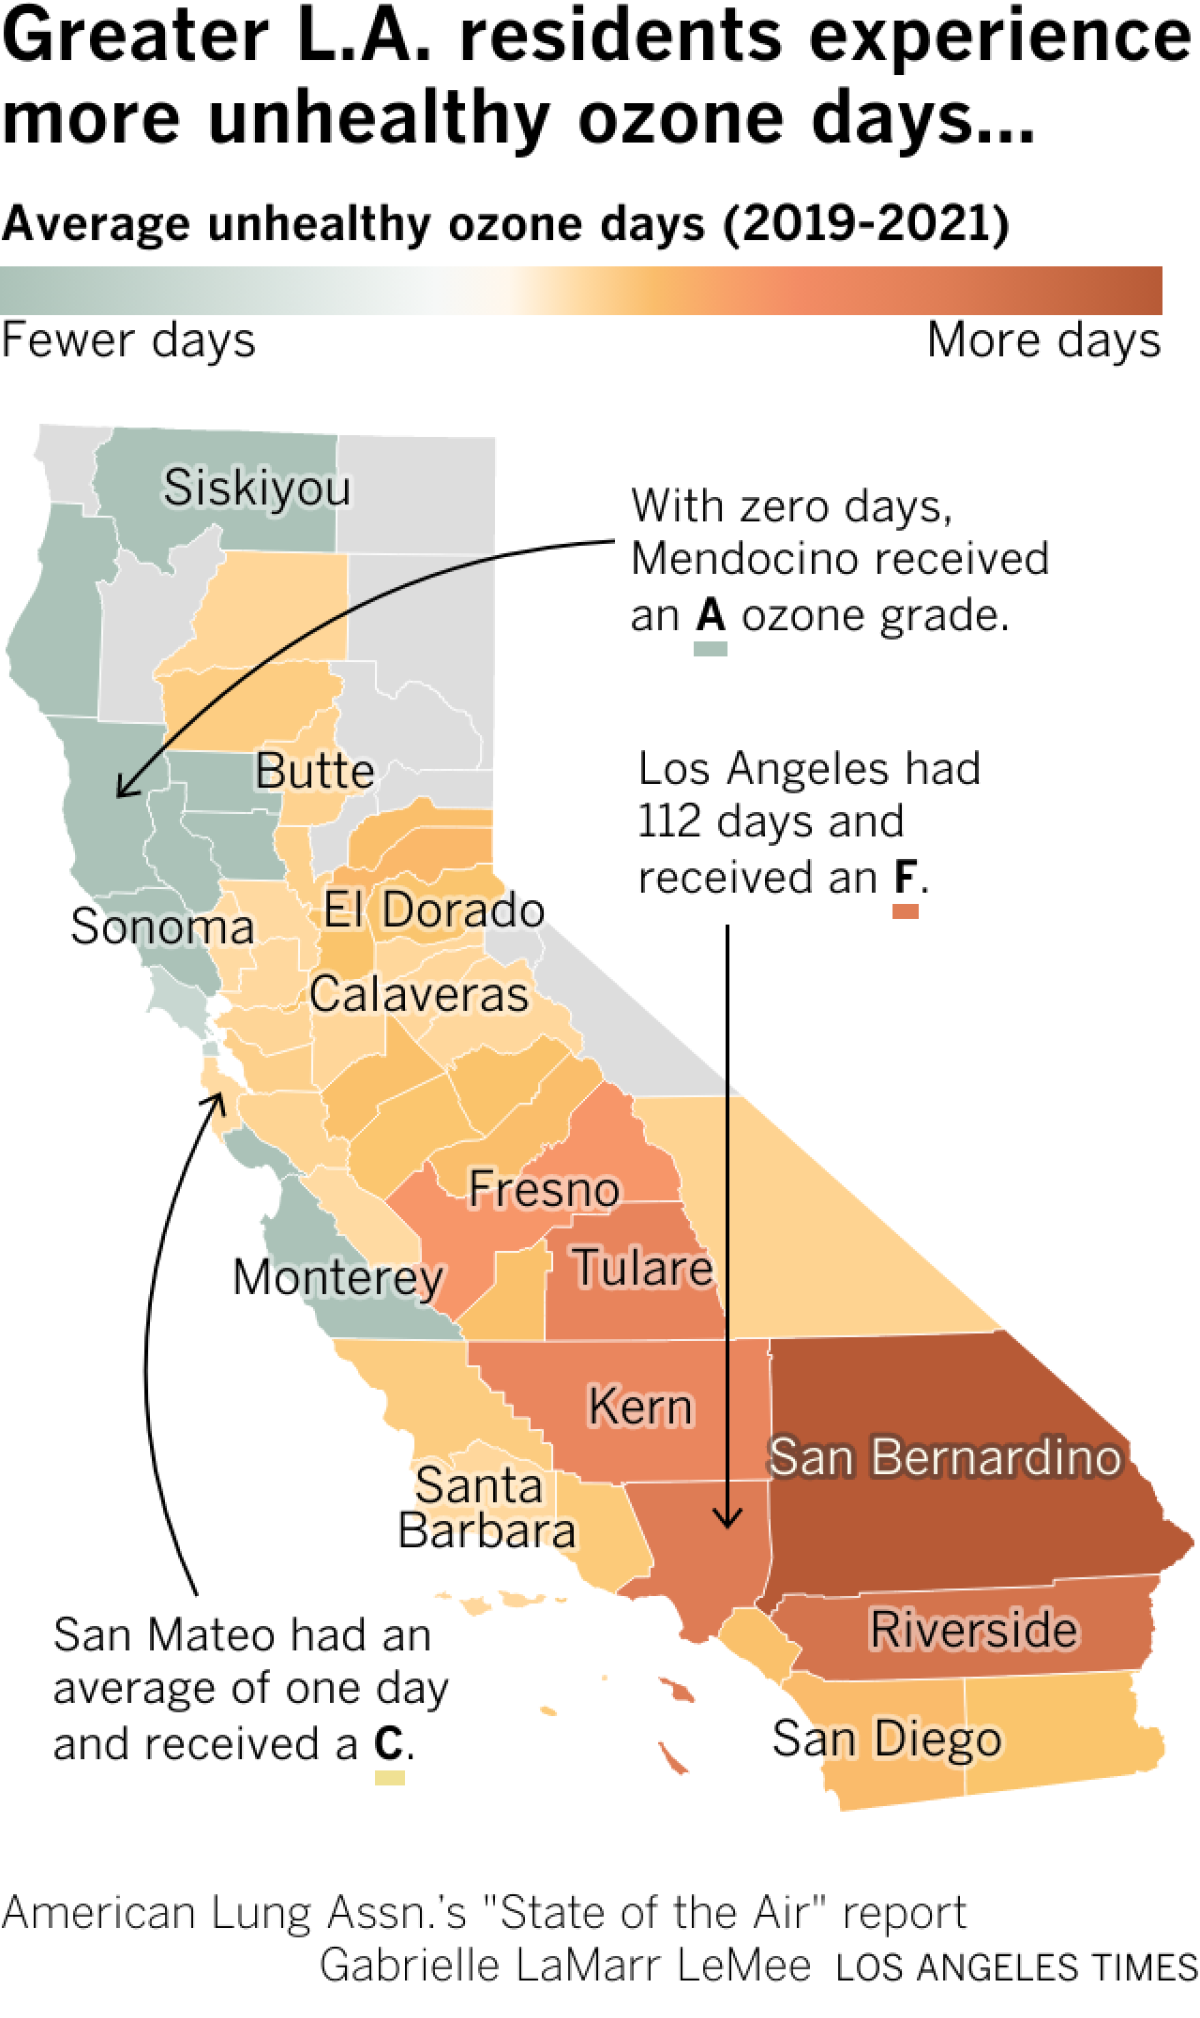 Greater L.A. residents experience more unhealthy ozone days...